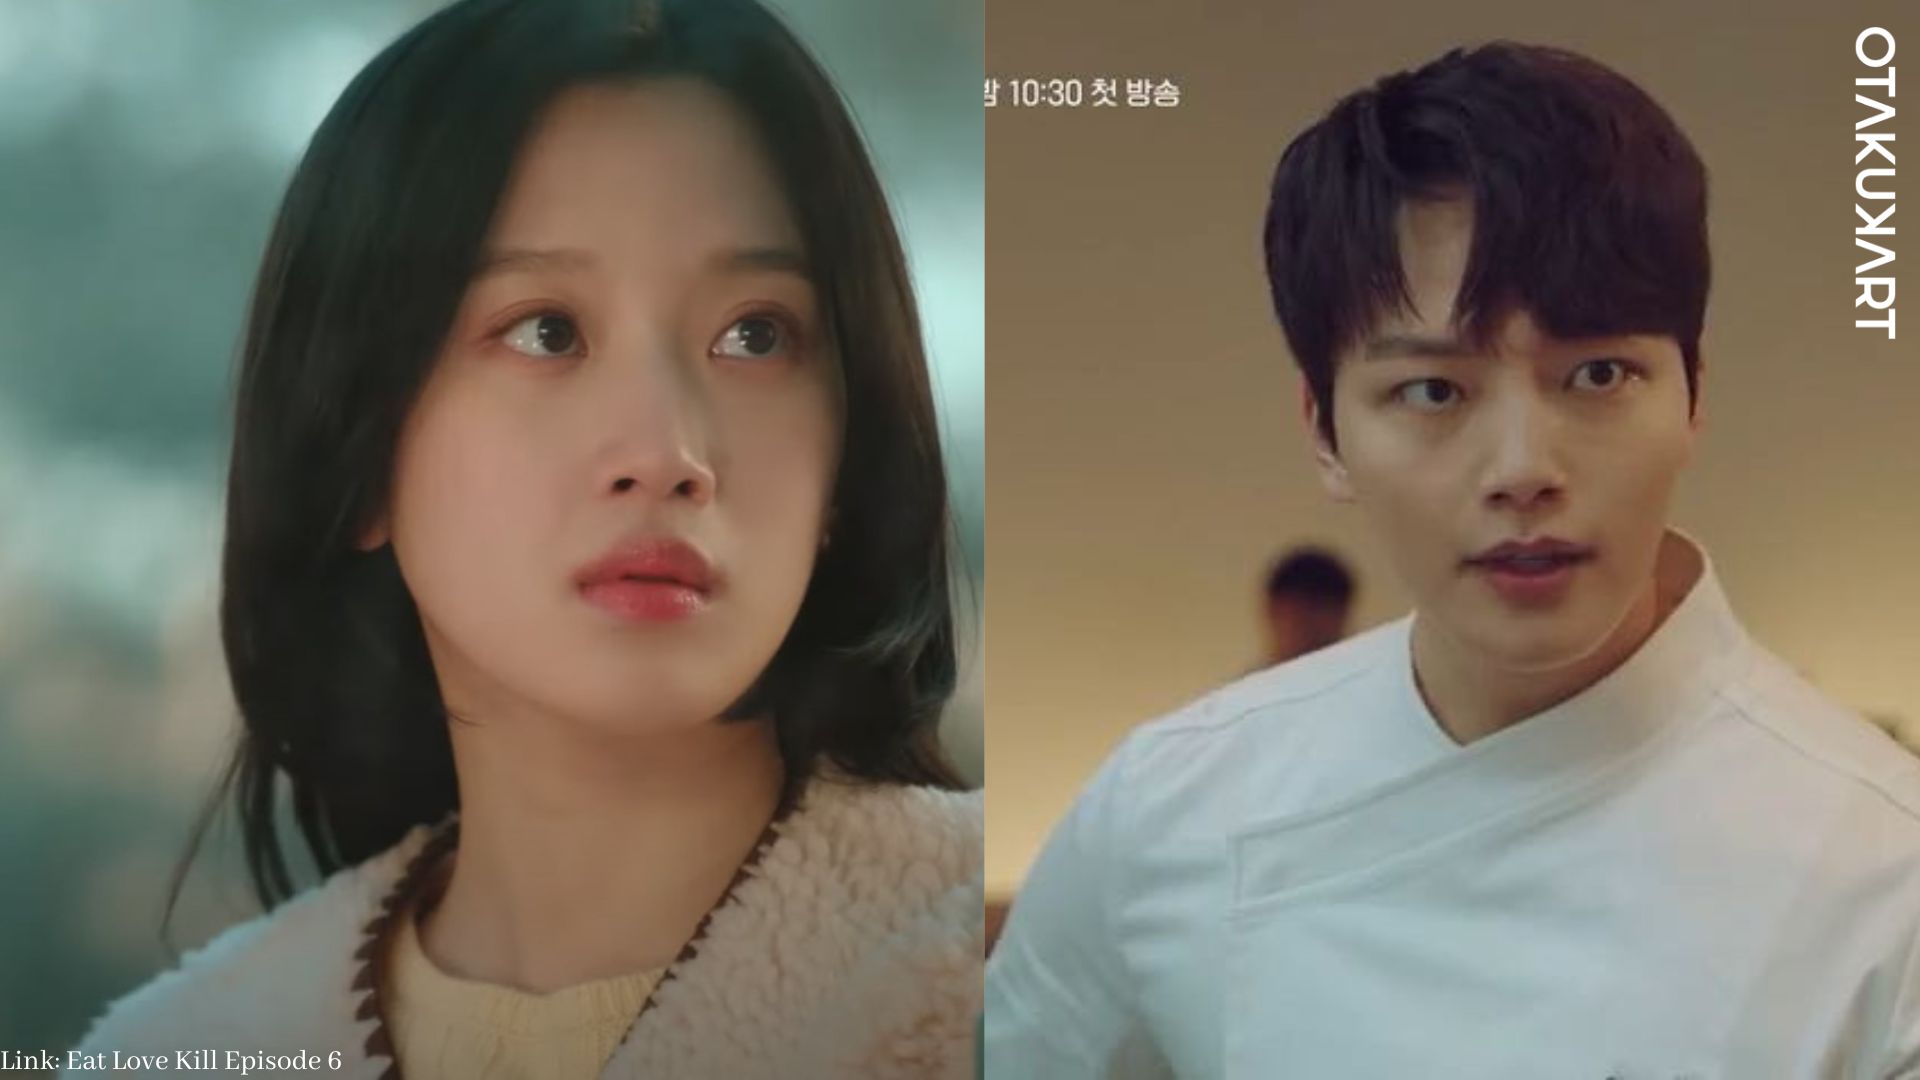 Link Eat Love Kill Episode 6 Release Date: Will the Return of Jin-geun Lead to New Revelations?